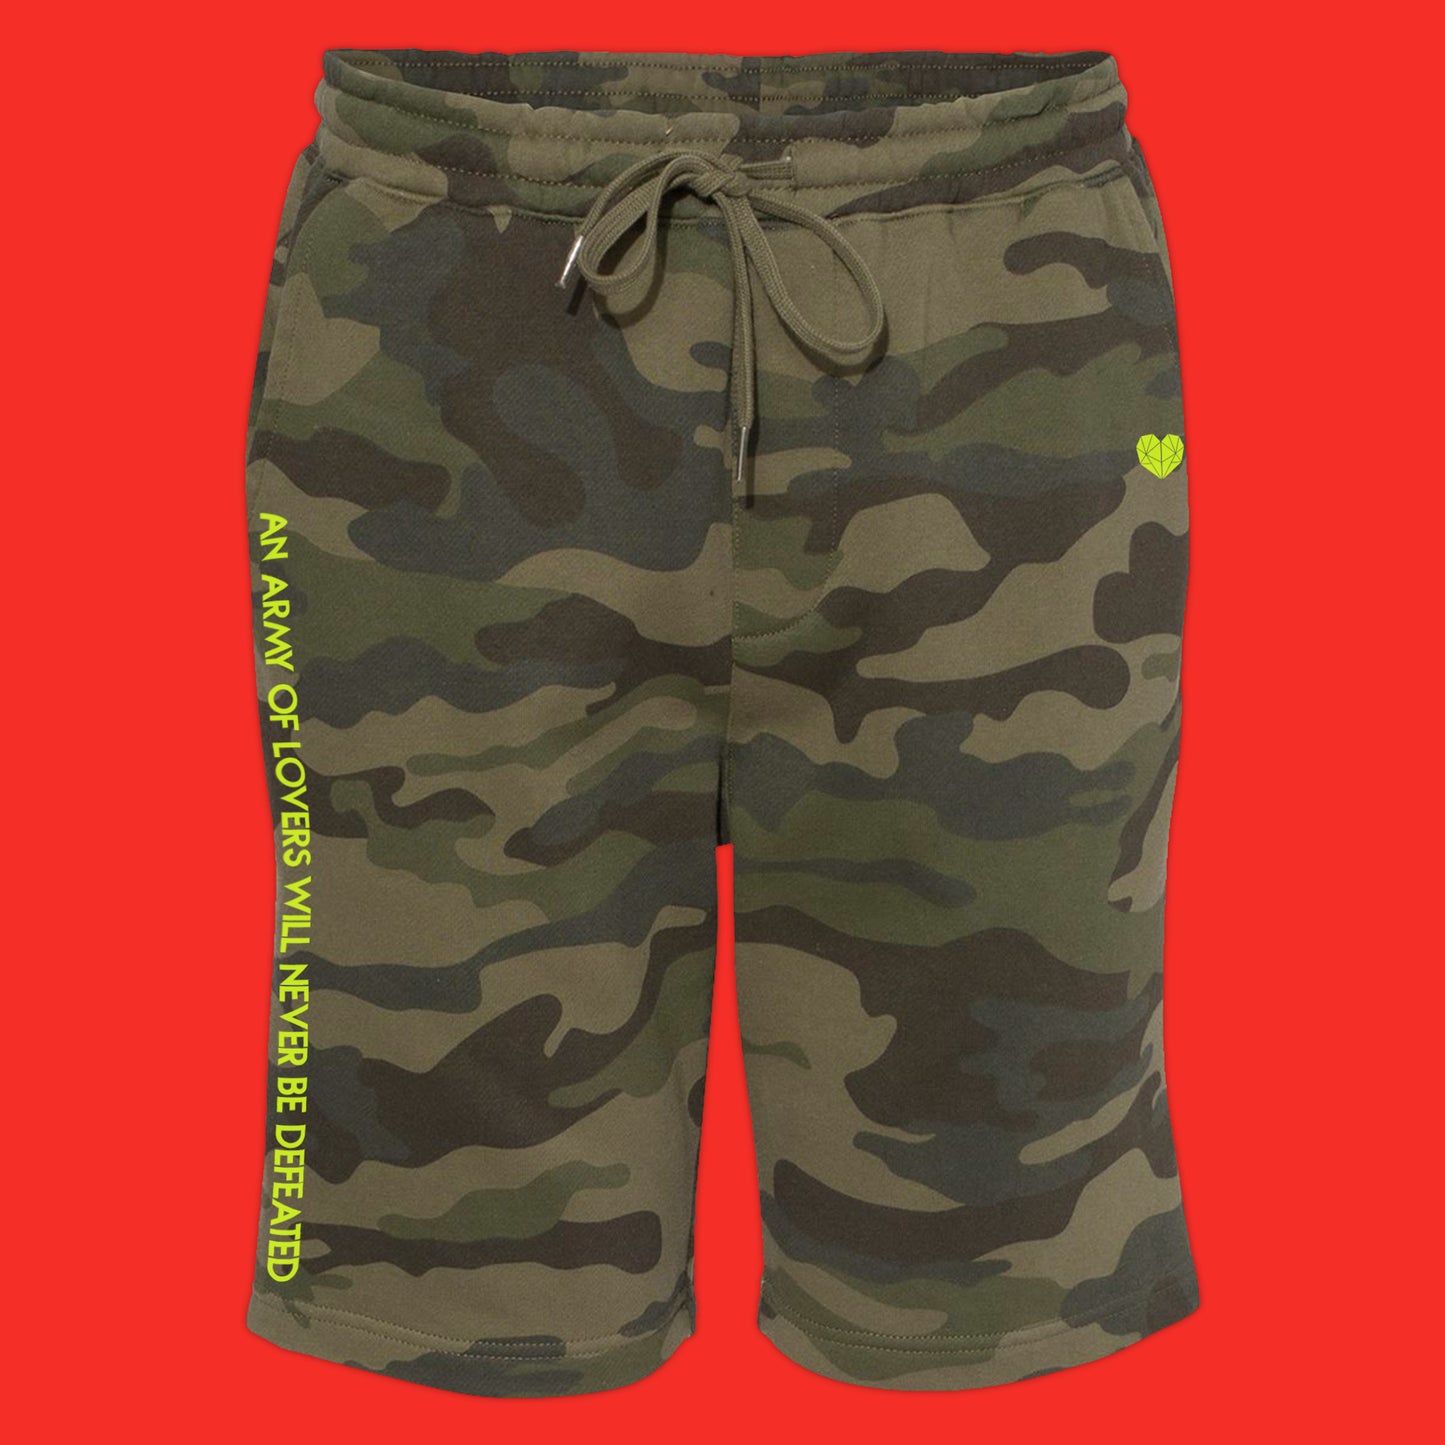 An army of lovers will never be defeated - matte neon yellow text on forest camo shorts by BBJ / Glitter Garage